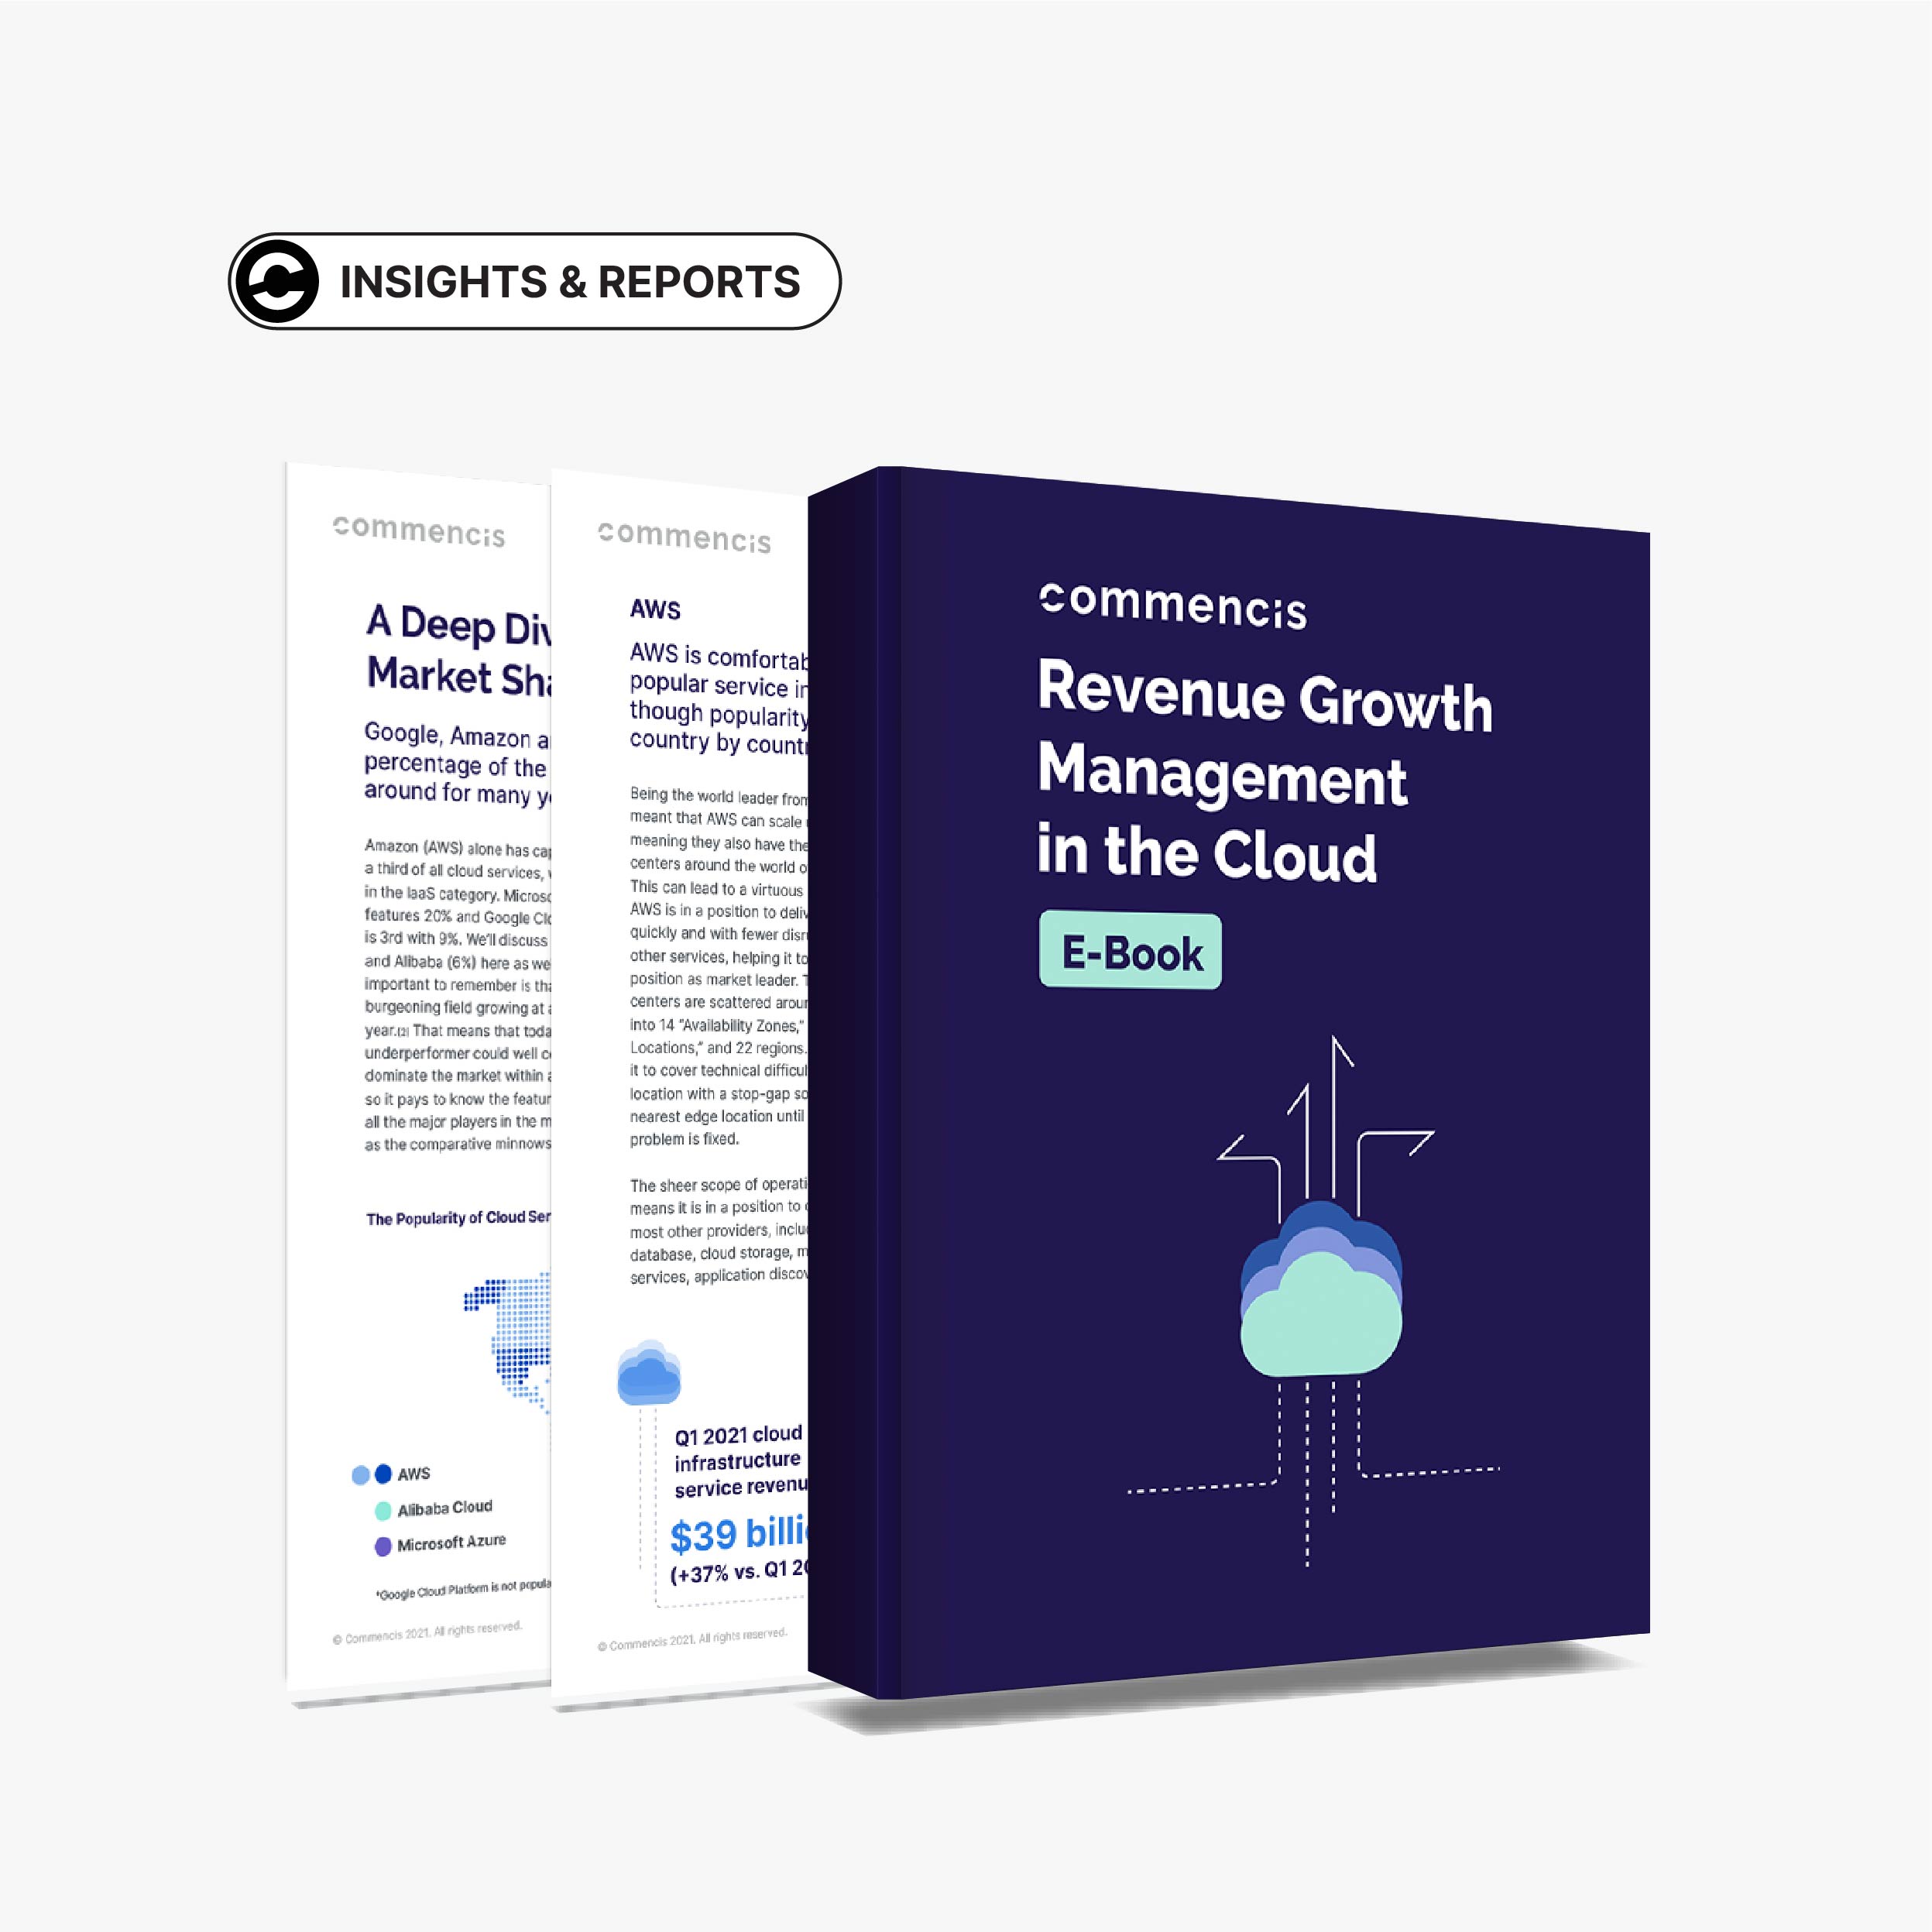 Revenue Growth Management in the Cloud